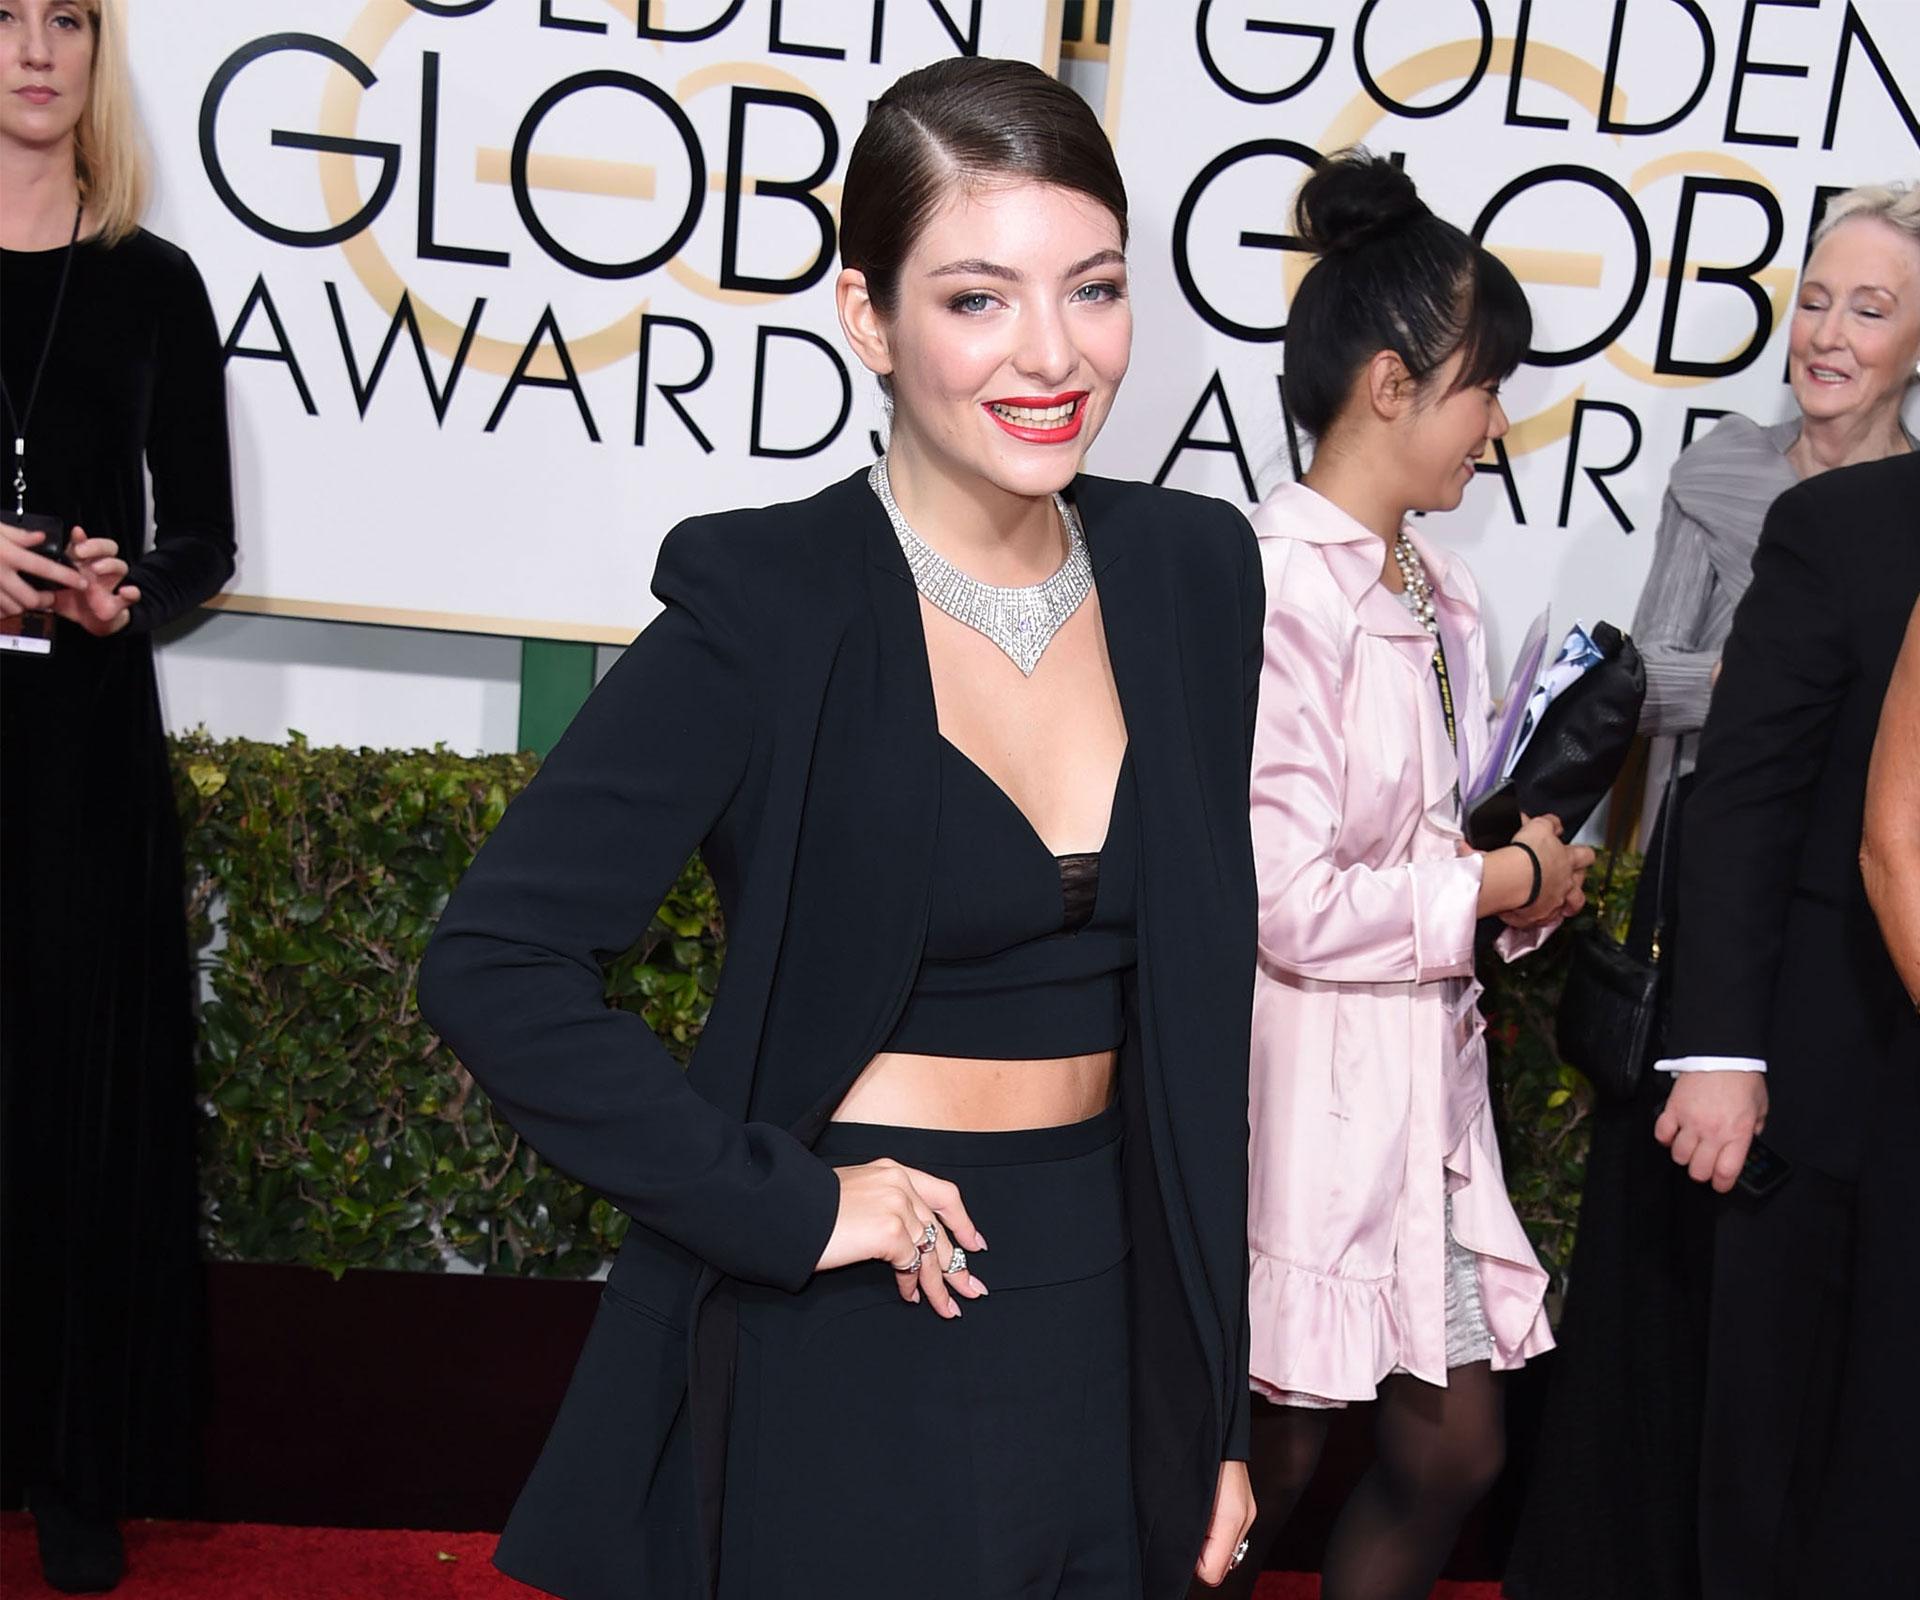 Lorde and Emma Stone's trendsetting Golden Globes looks